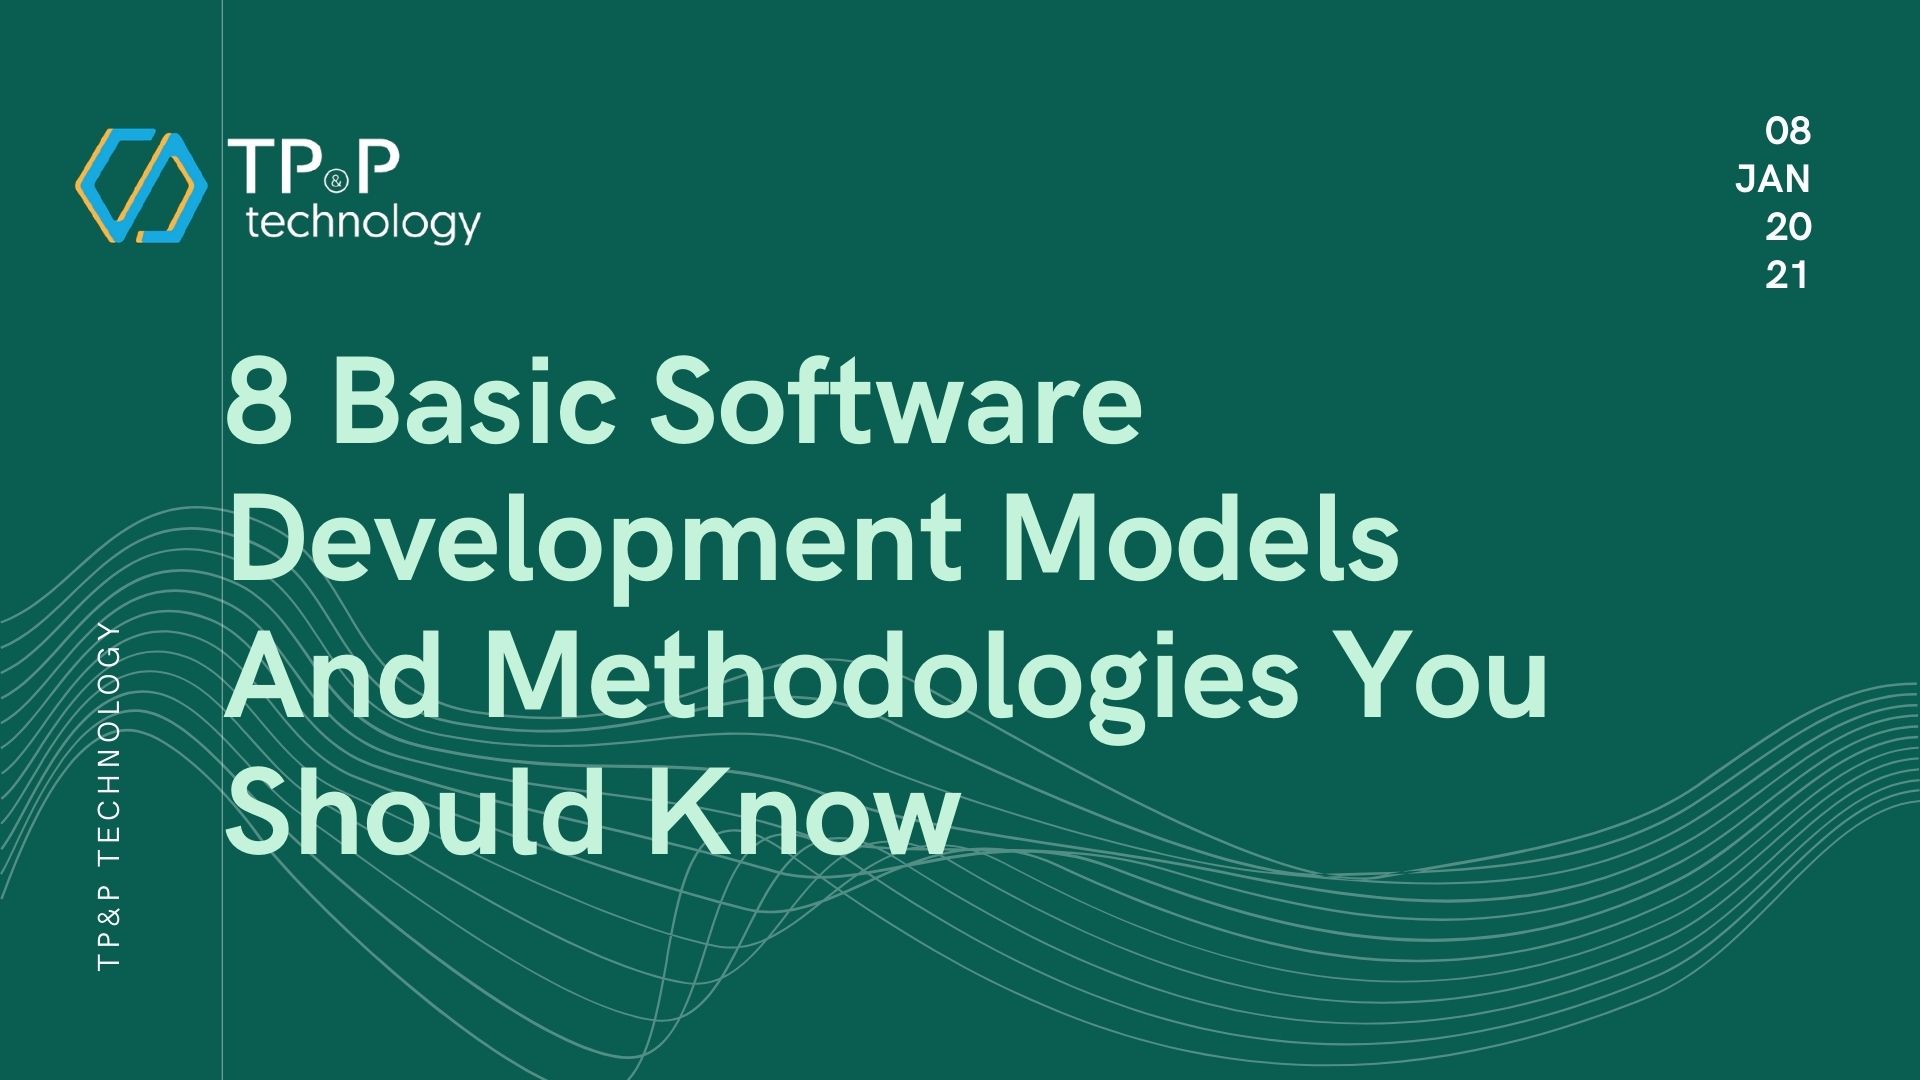 8 Basic Software Development Models And Methodologies You Should Know